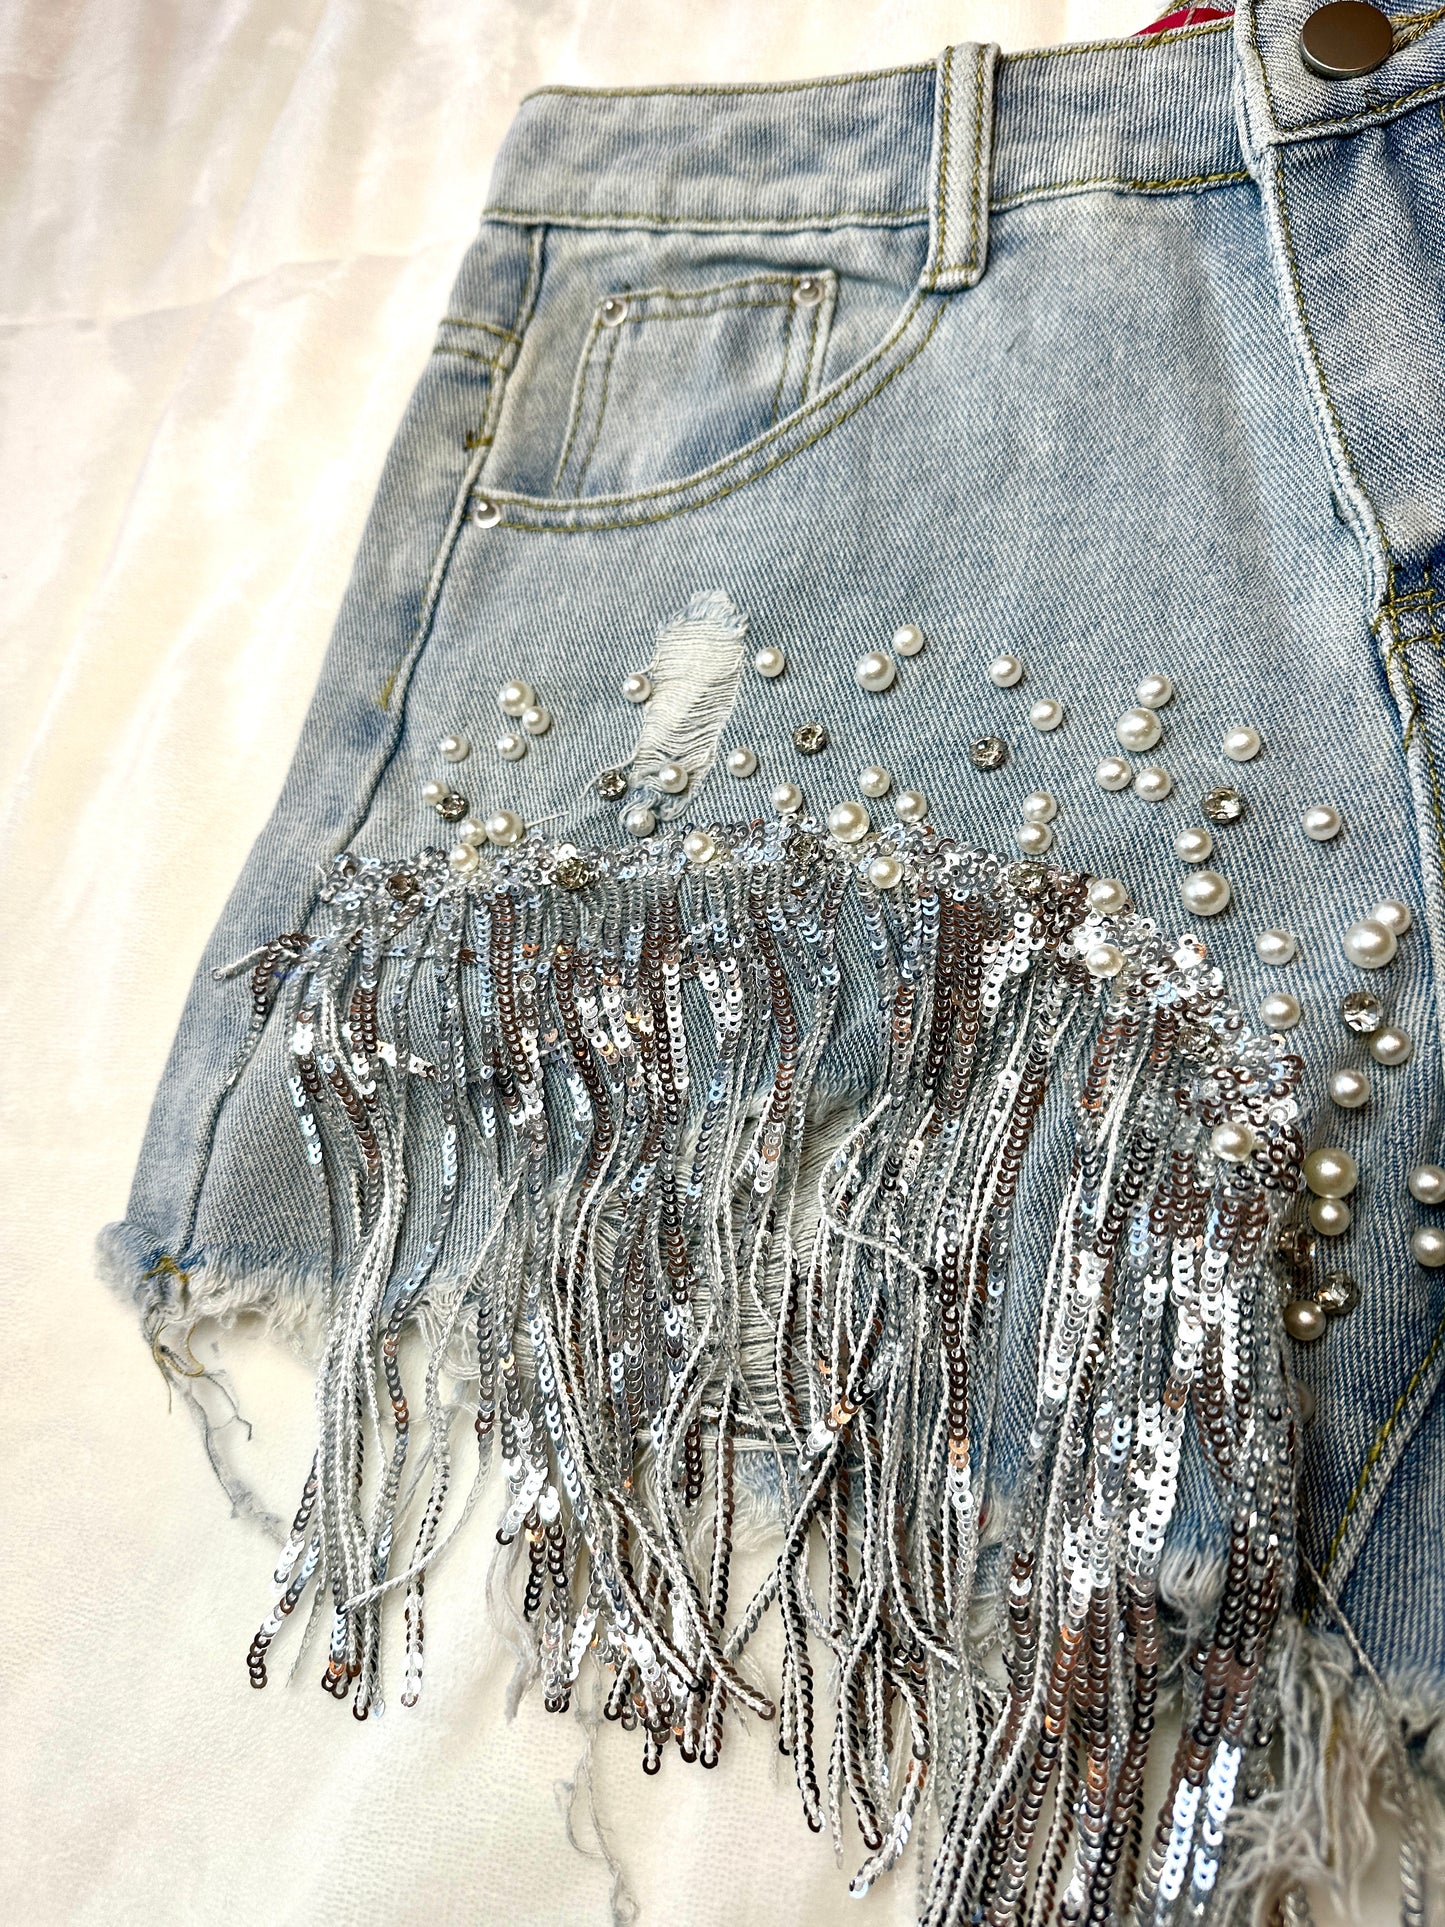 Glitter Up, Cowgirl! Shorts